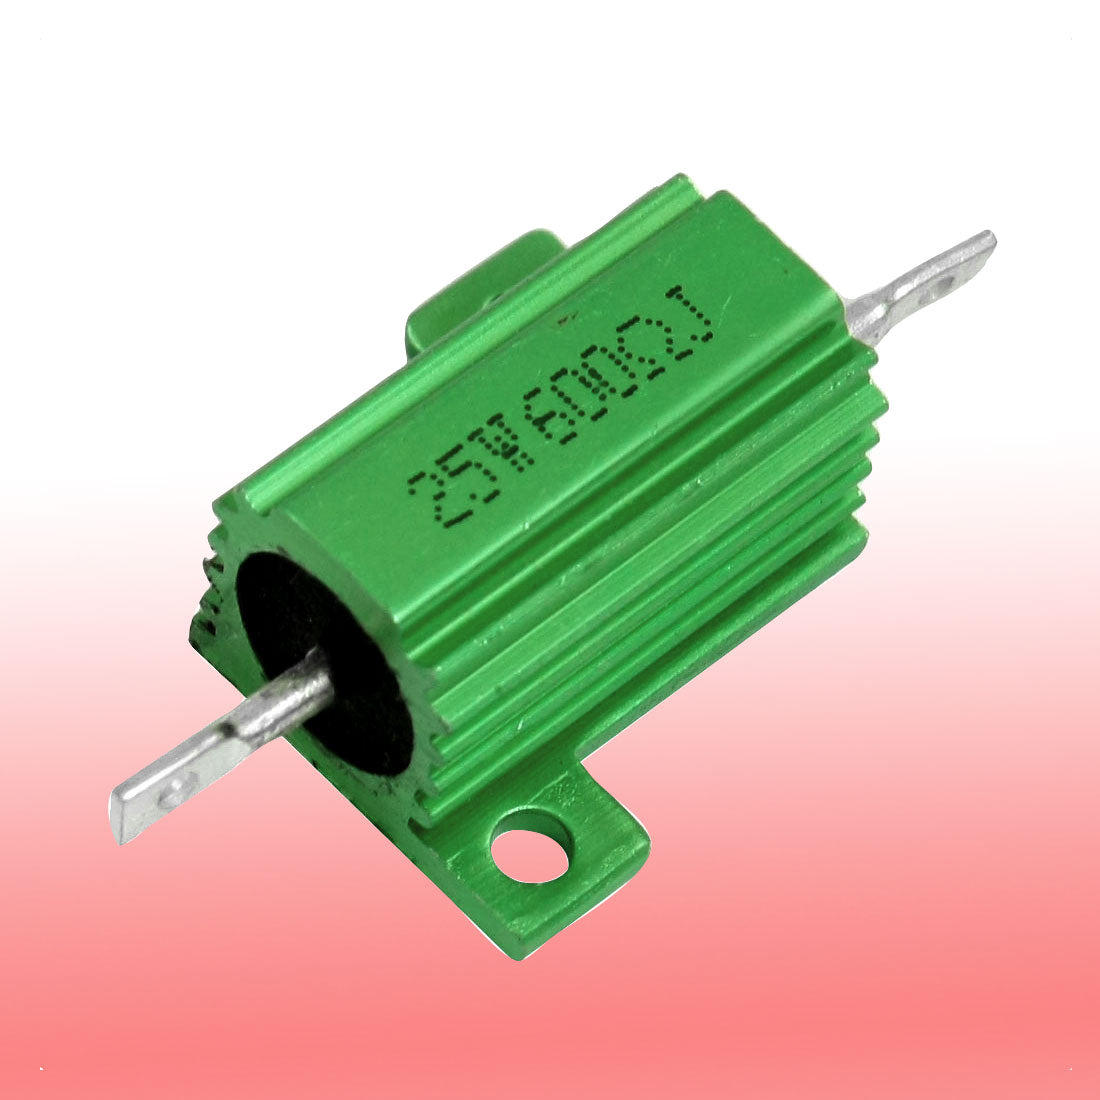 uxcell Uxcell 5% 600 Ohm 25 Watt Green Aluminum Housed Clad Wirewound Resistor